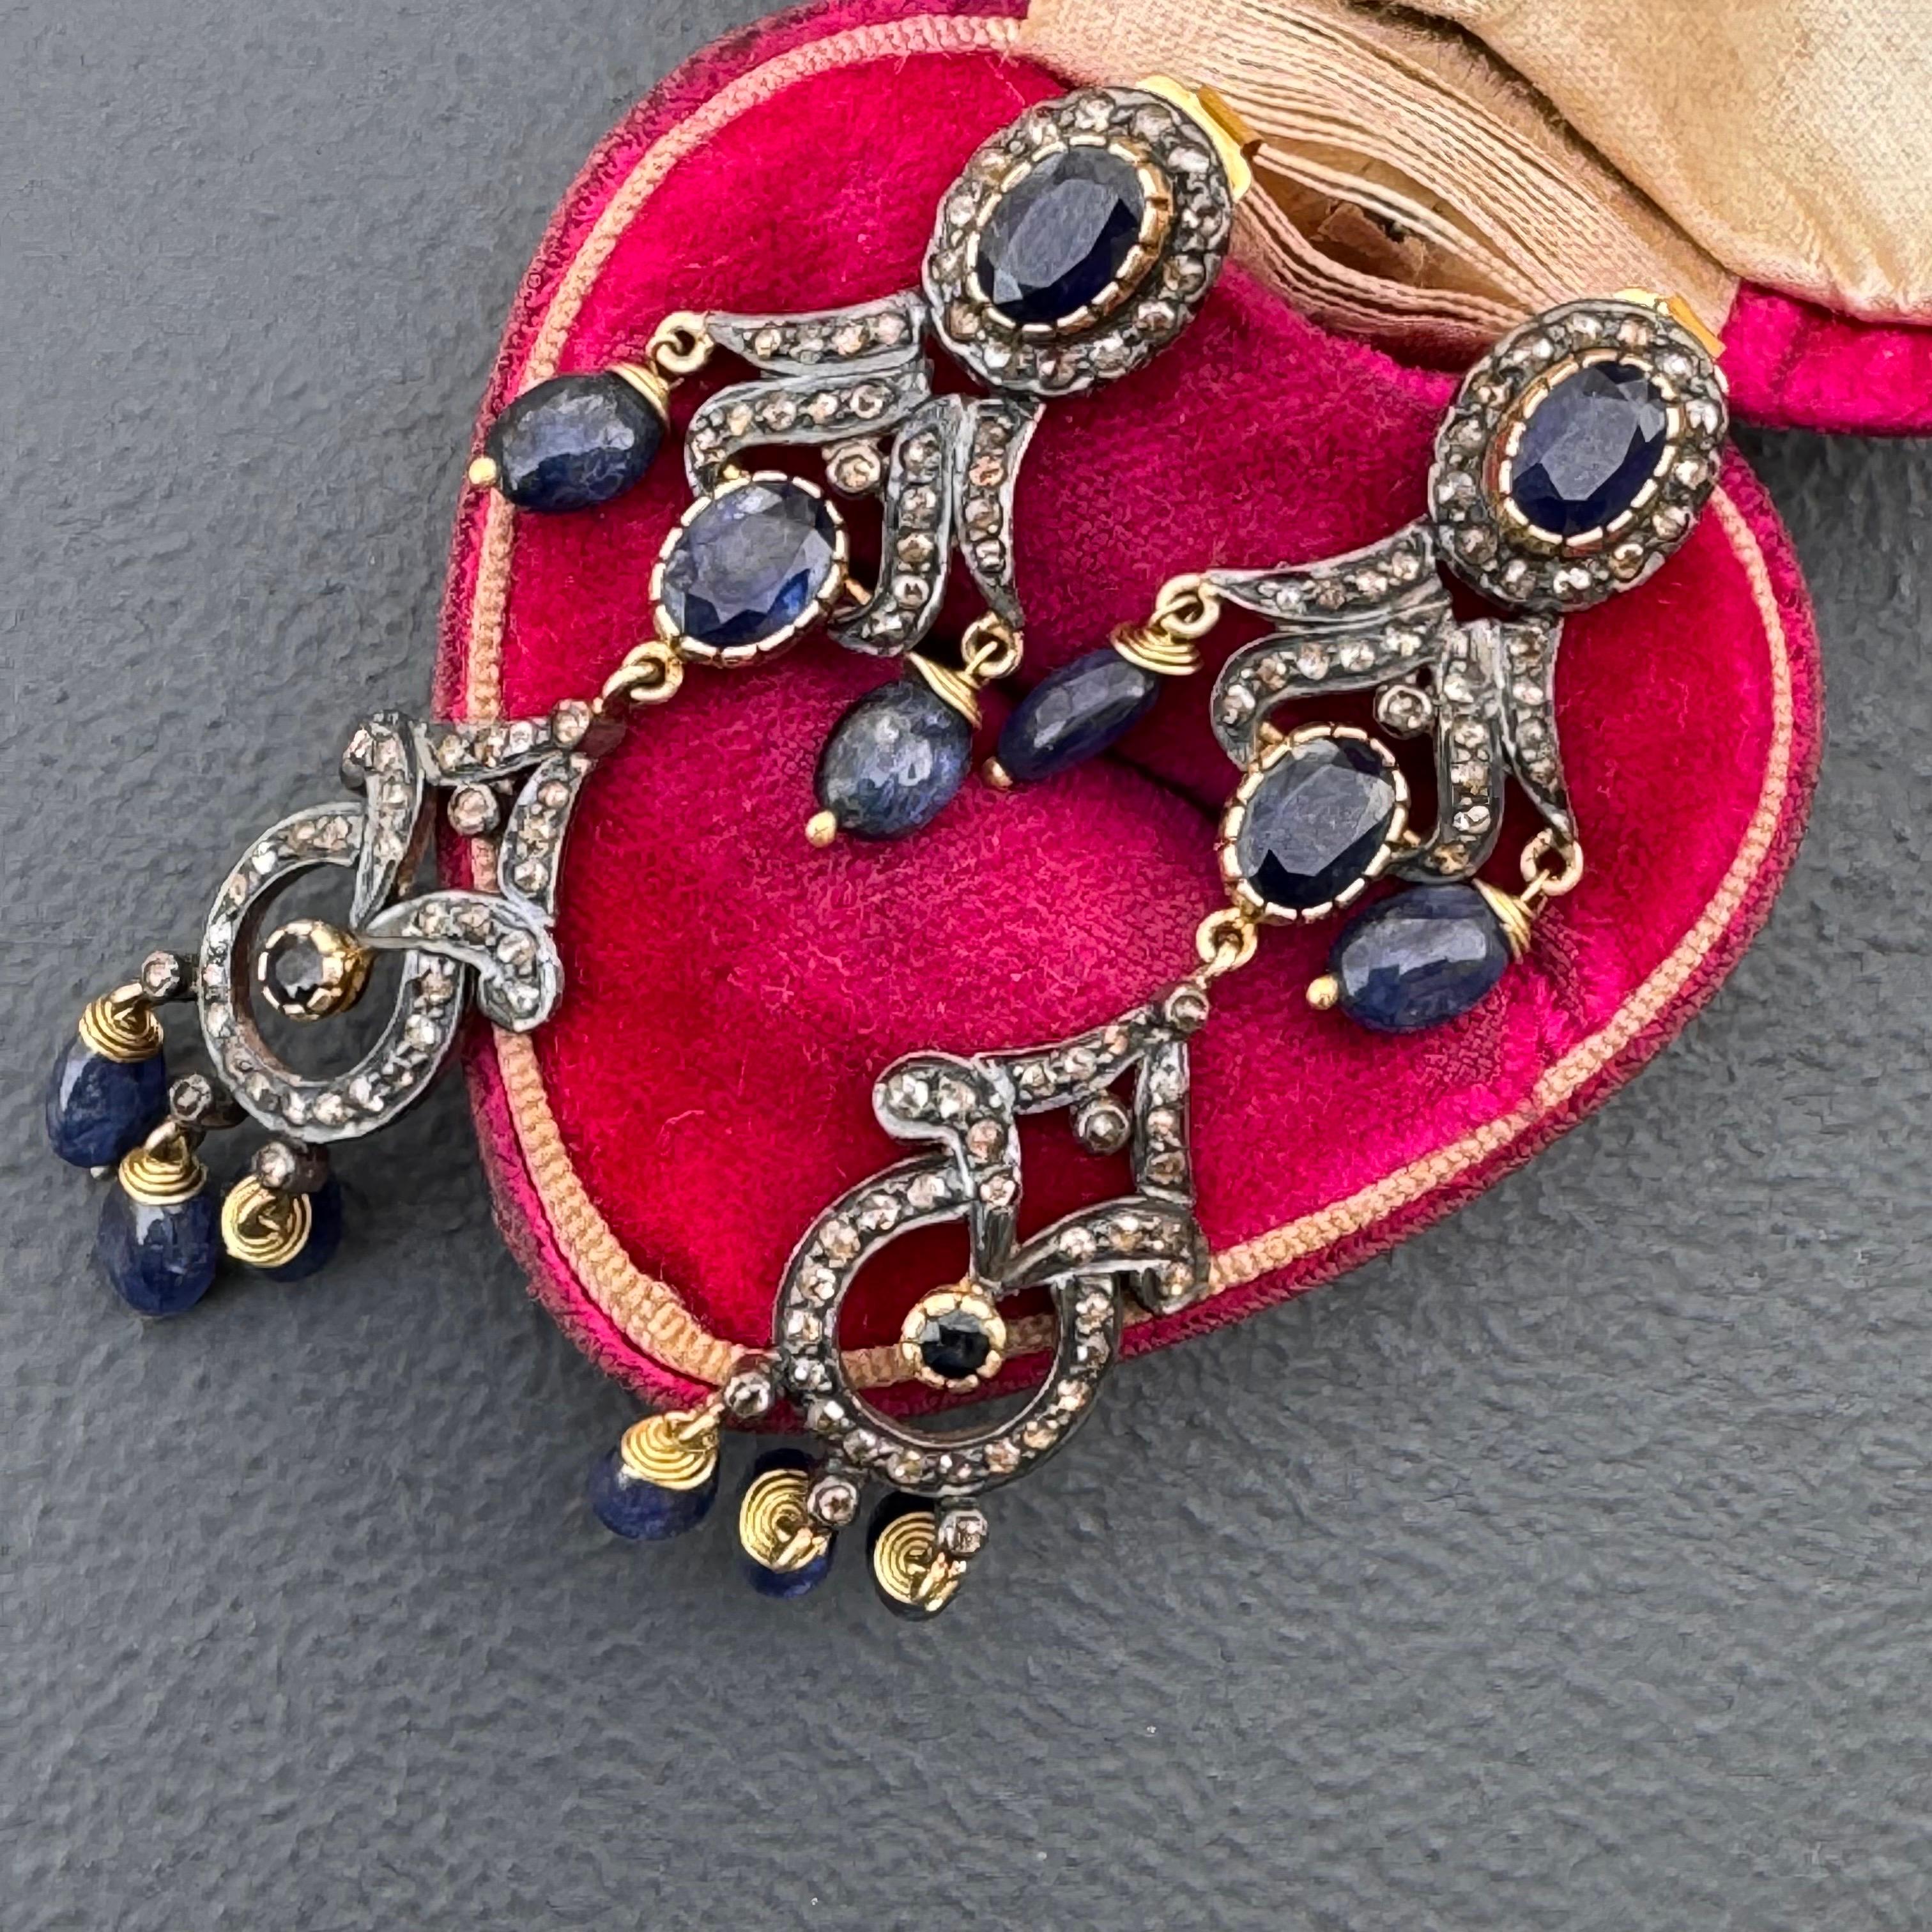 Handmade Victorian style Vintage Silver dangle drop earrings for pieced ears . Most likely earrings are made in India in late 20th to early 21st century with plenty of small rose cut diamonds and genuine faceted sapphire cabs.
Unsigned